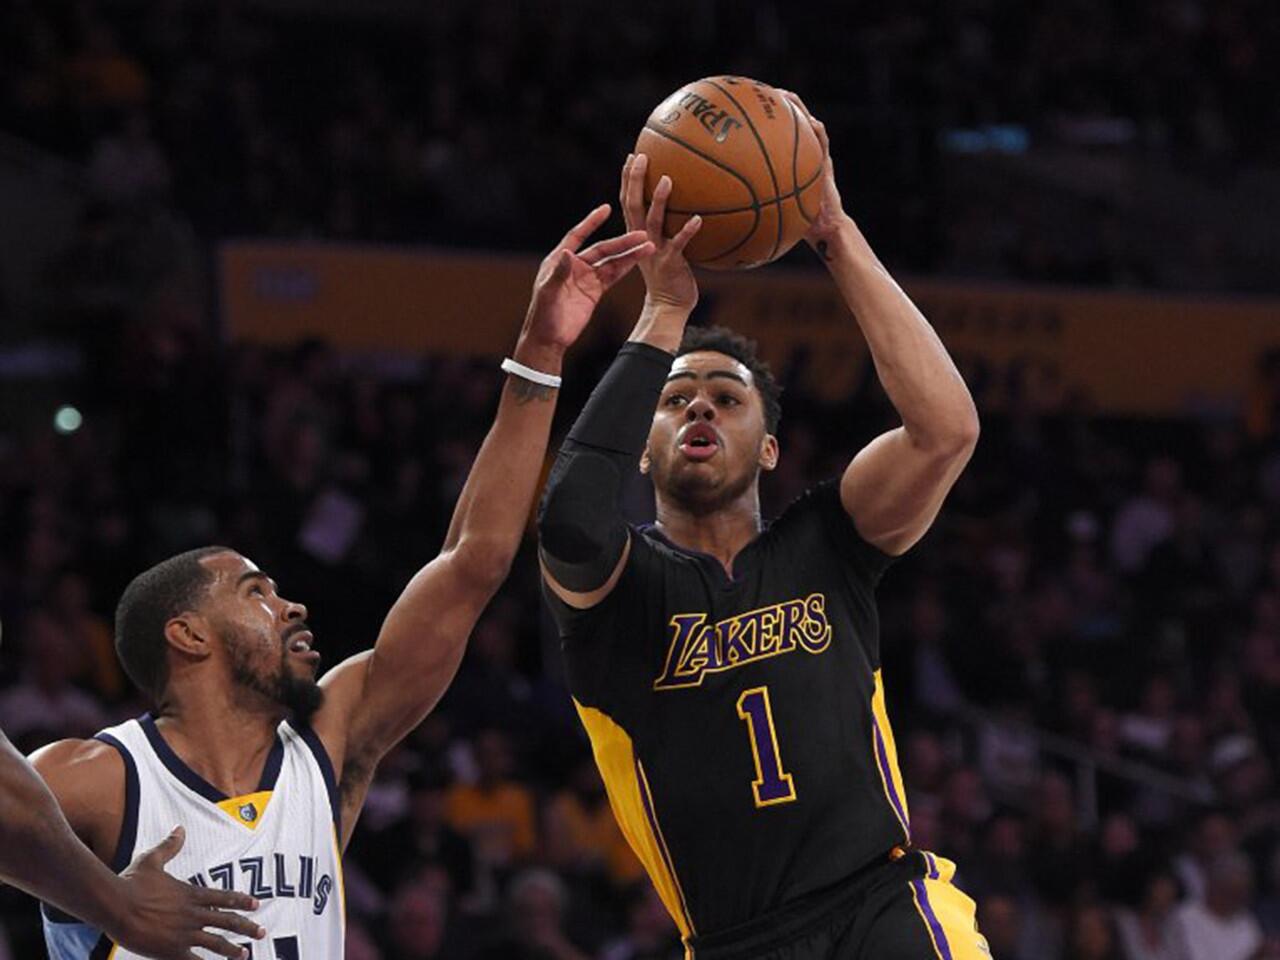 D'Angelo Russell drives to the basket against Memphis guard Mike Conley during the first half of the Lakers' 112-95 loss to the Grizzlies on Feb. 26 at Staples Center.